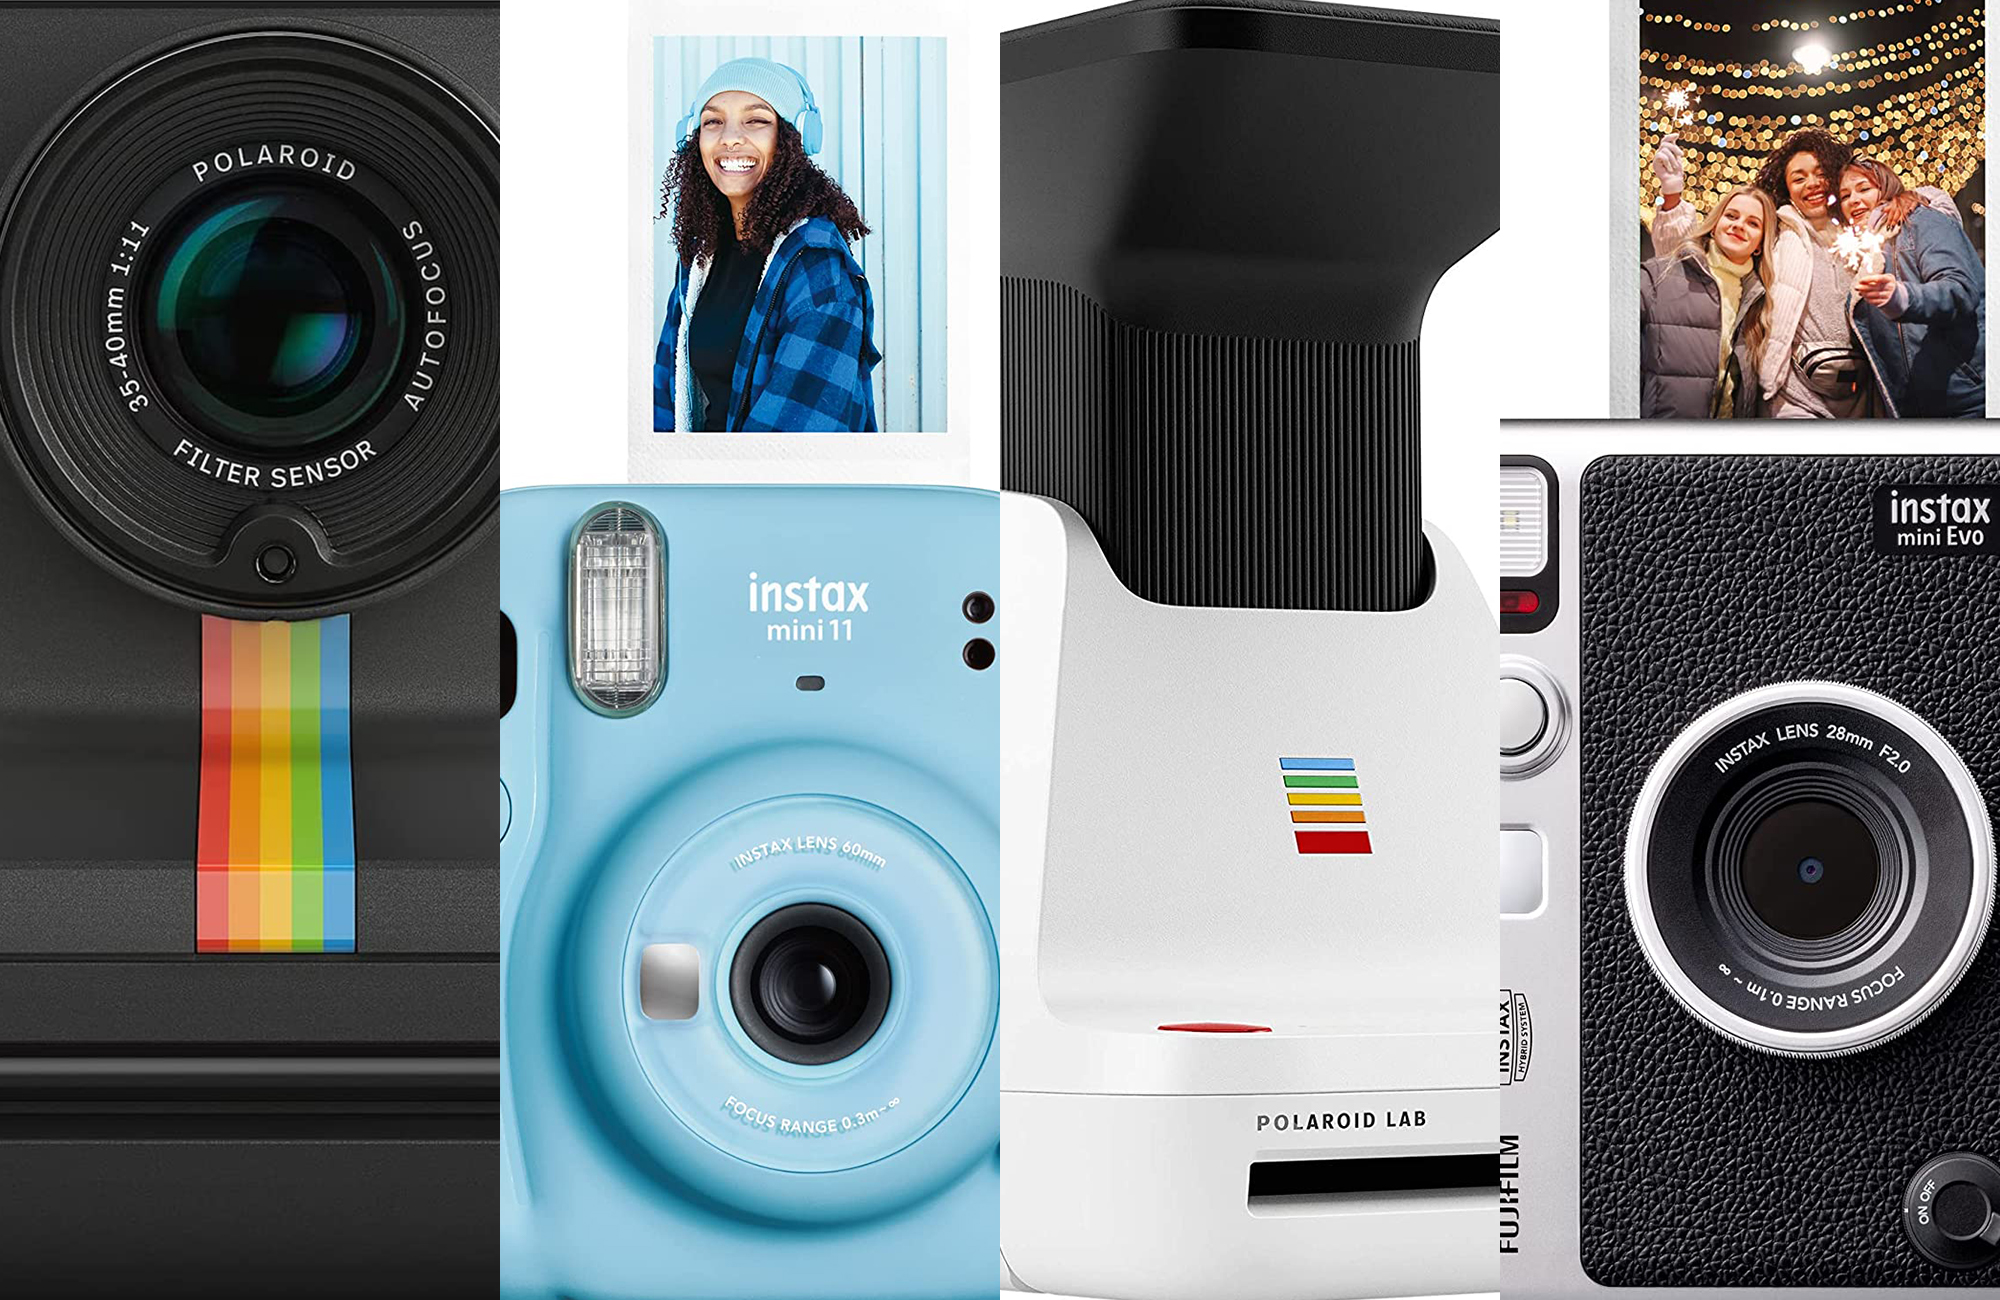 Fujifilm Instax Mini 12 - Review 2023 - PCMag Middle East